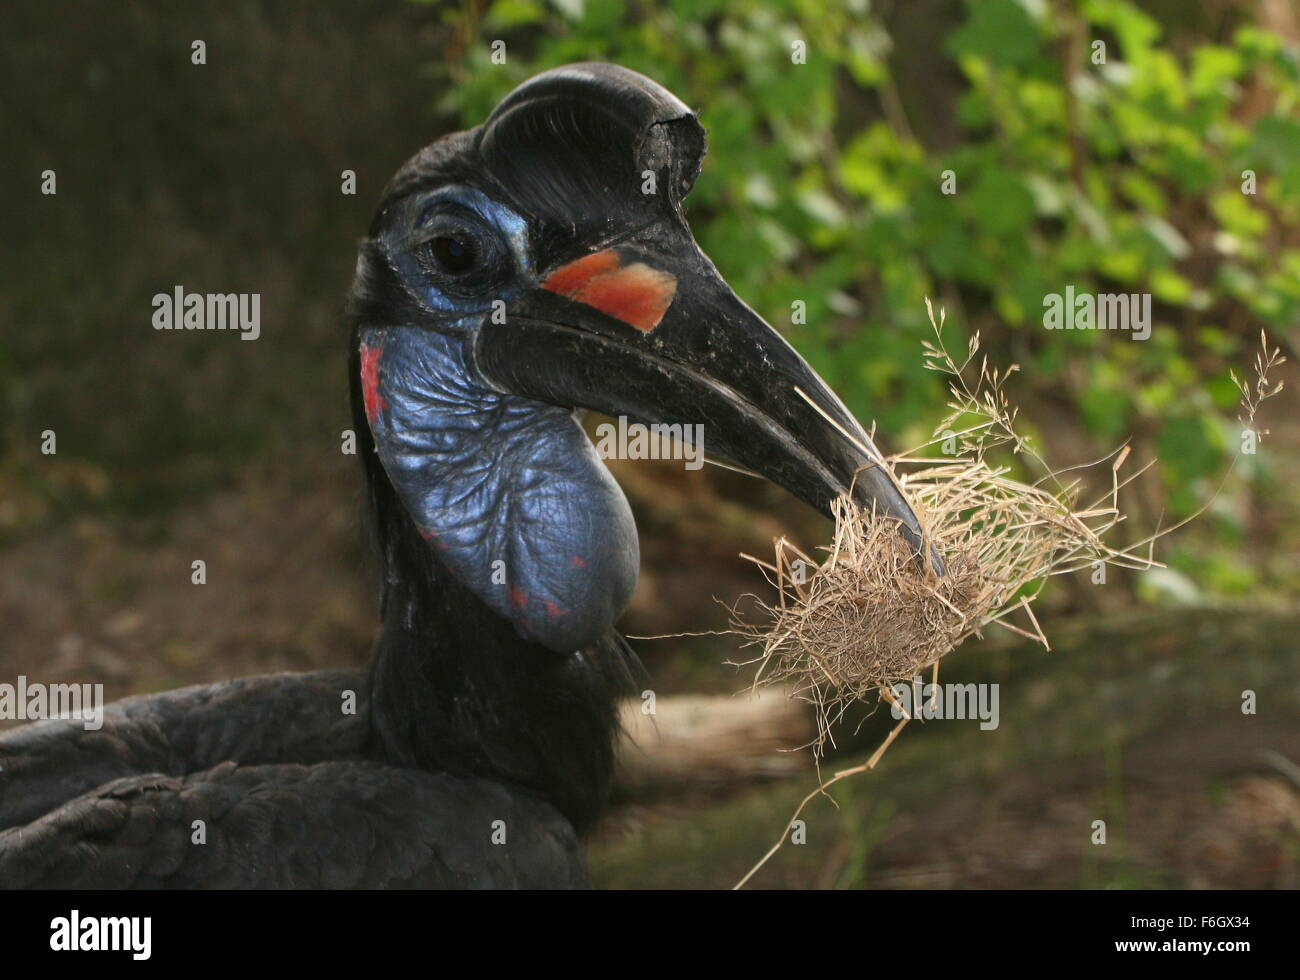 Female Abyssinian or Northern Ground hornbill (Bucorvus abyssinicus) with grass, used as nesting material Stock Photo